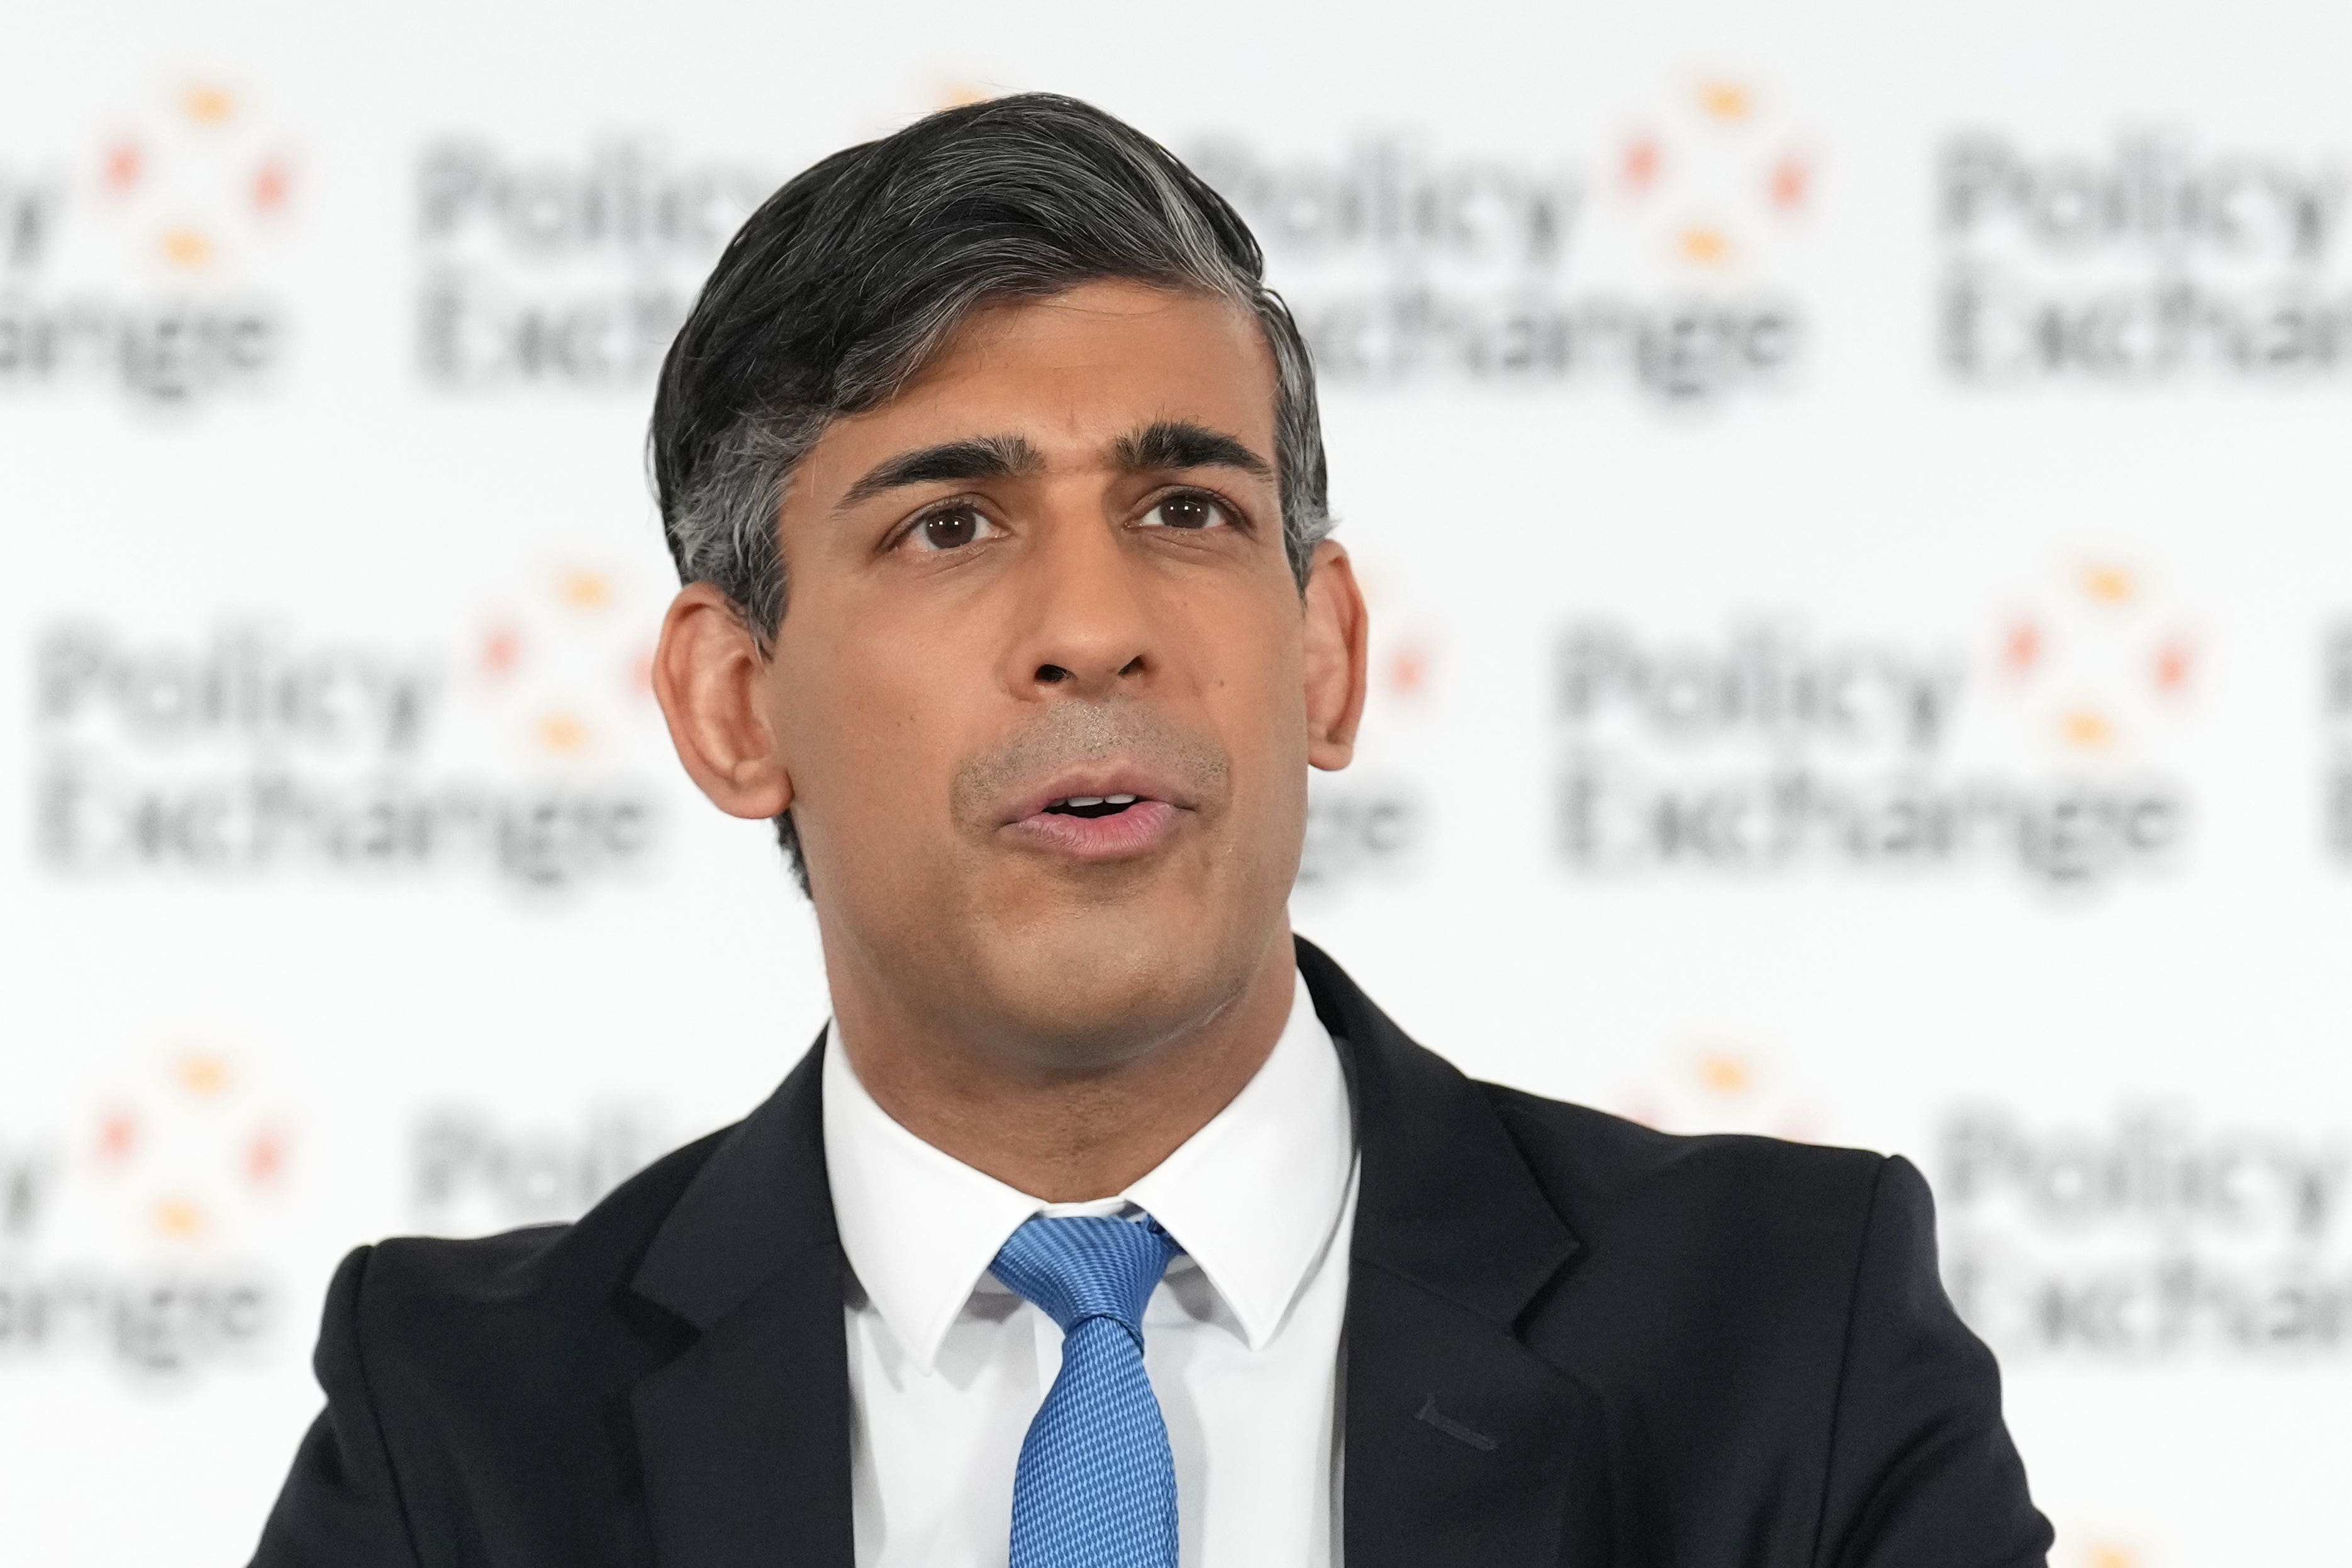 Rishi Sunak delivers a keynote address at the Policy Exchange think tank in central London on Monday